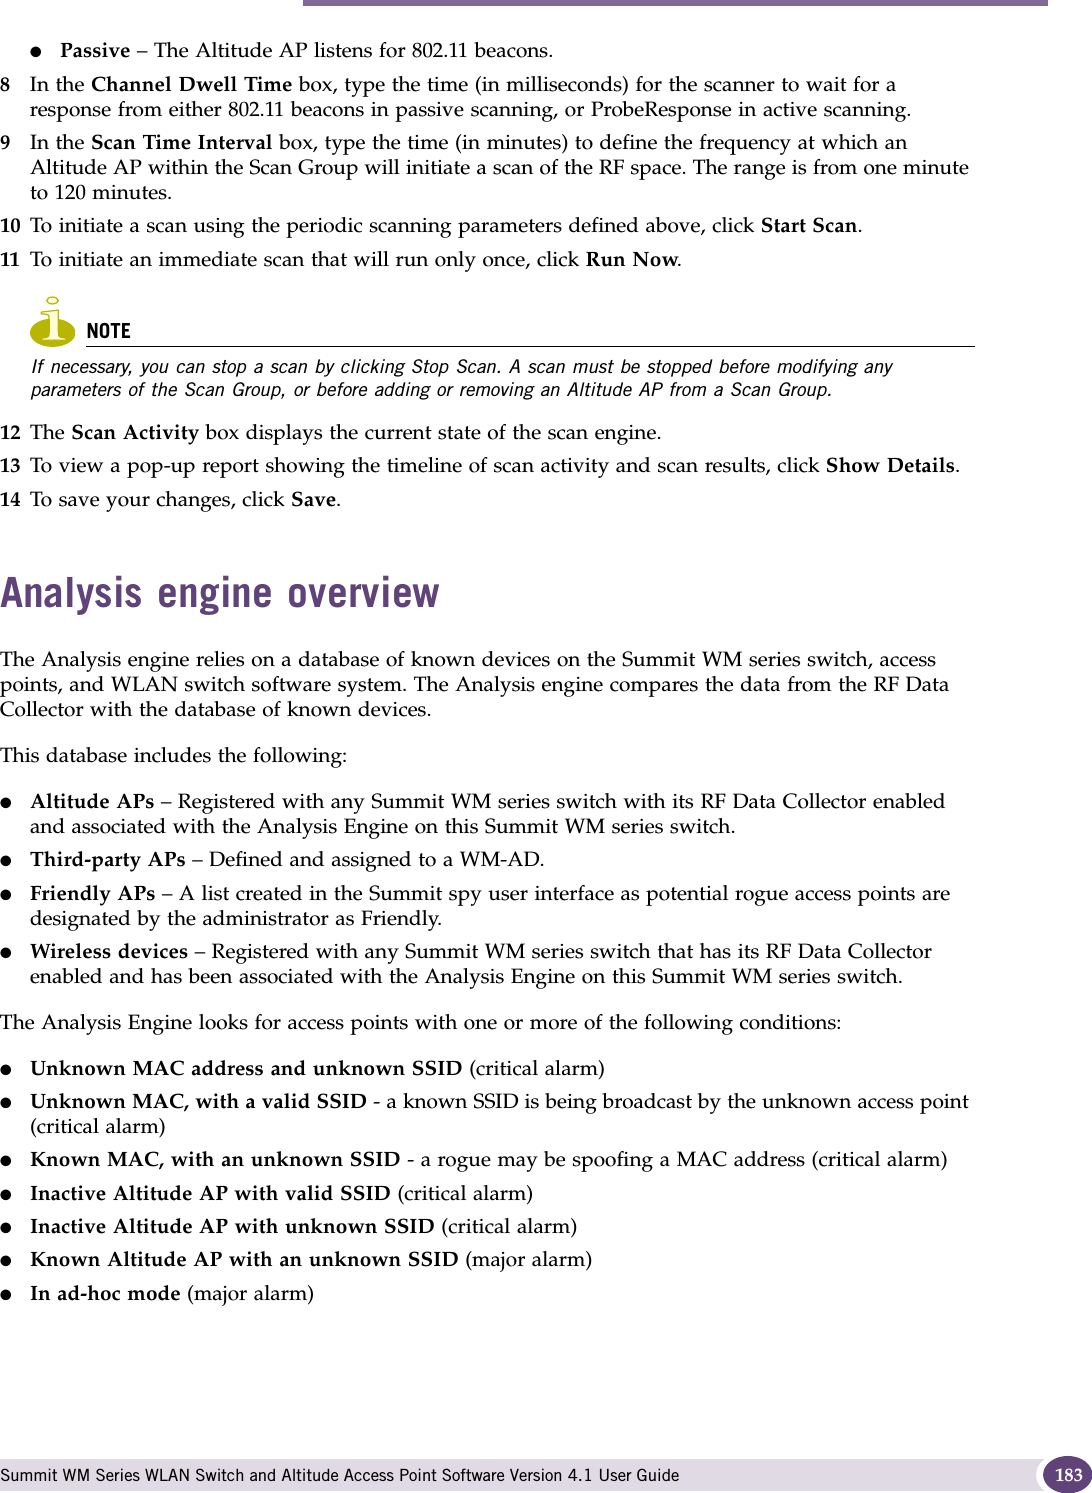 Analysis engine overview Summit WM Series WLAN Switch and Altitude Access Point Software Version 4.1 User Guide 183●Passive – The Altitude AP listens for 802.11 beacons.8In the Channel Dwell Time box, type the time (in milliseconds) for the scanner to wait for a response from either 802.11 beacons in passive scanning, or ProbeResponse in active scanning.9In the Scan Time Interval box, type the time (in minutes) to define the frequency at which an Altitude AP within the Scan Group will initiate a scan of the RF space. The range is from one minute to 120 minutes.10 To initiate a scan using the periodic scanning parameters defined above, click Start Scan.11 To initiate an immediate scan that will run only once, click Run Now.NOTEIf necessary, you can stop a scan by clicking Stop Scan. A scan must be stopped before modifying any parameters of the Scan Group, or before adding or removing an Altitude AP from a Scan Group.12 The Scan Activity box displays the current state of the scan engine.13 To view a pop-up report showing the timeline of scan activity and scan results, click Show Details.14 To save your changes, click Save.Analysis engine overviewThe Analysis engine relies on a database of known devices on the Summit WM series switch, access points, and WLAN switch software system. The Analysis engine compares the data from the RF Data Collector with the database of known devices.This database includes the following:●Altitude APs – Registered with any Summit WM series switch with its RF Data Collector enabled and associated with the Analysis Engine on this Summit WM series switch.●Third-party APs – Defined and assigned to a WM-AD.●Friendly APs – A list created in the Summit spy user interface as potential rogue access points are designated by the administrator as Friendly.●Wireless devices – Registered with any Summit WM series switch that has its RF Data Collector enabled and has been associated with the Analysis Engine on this Summit WM series switch.The Analysis Engine looks for access points with one or more of the following conditions:●Unknown MAC address and unknown SSID (critical alarm)●Unknown MAC, with a valid SSID - a known SSID is being broadcast by the unknown access point (critical alarm)●Known MAC, with an unknown SSID - a rogue may be spoofing a MAC address (critical alarm)●Inactive Altitude AP with valid SSID (critical alarm)●Inactive Altitude AP with unknown SSID (critical alarm)●Known Altitude AP with an unknown SSID (major alarm)●In ad-hoc mode (major alarm)